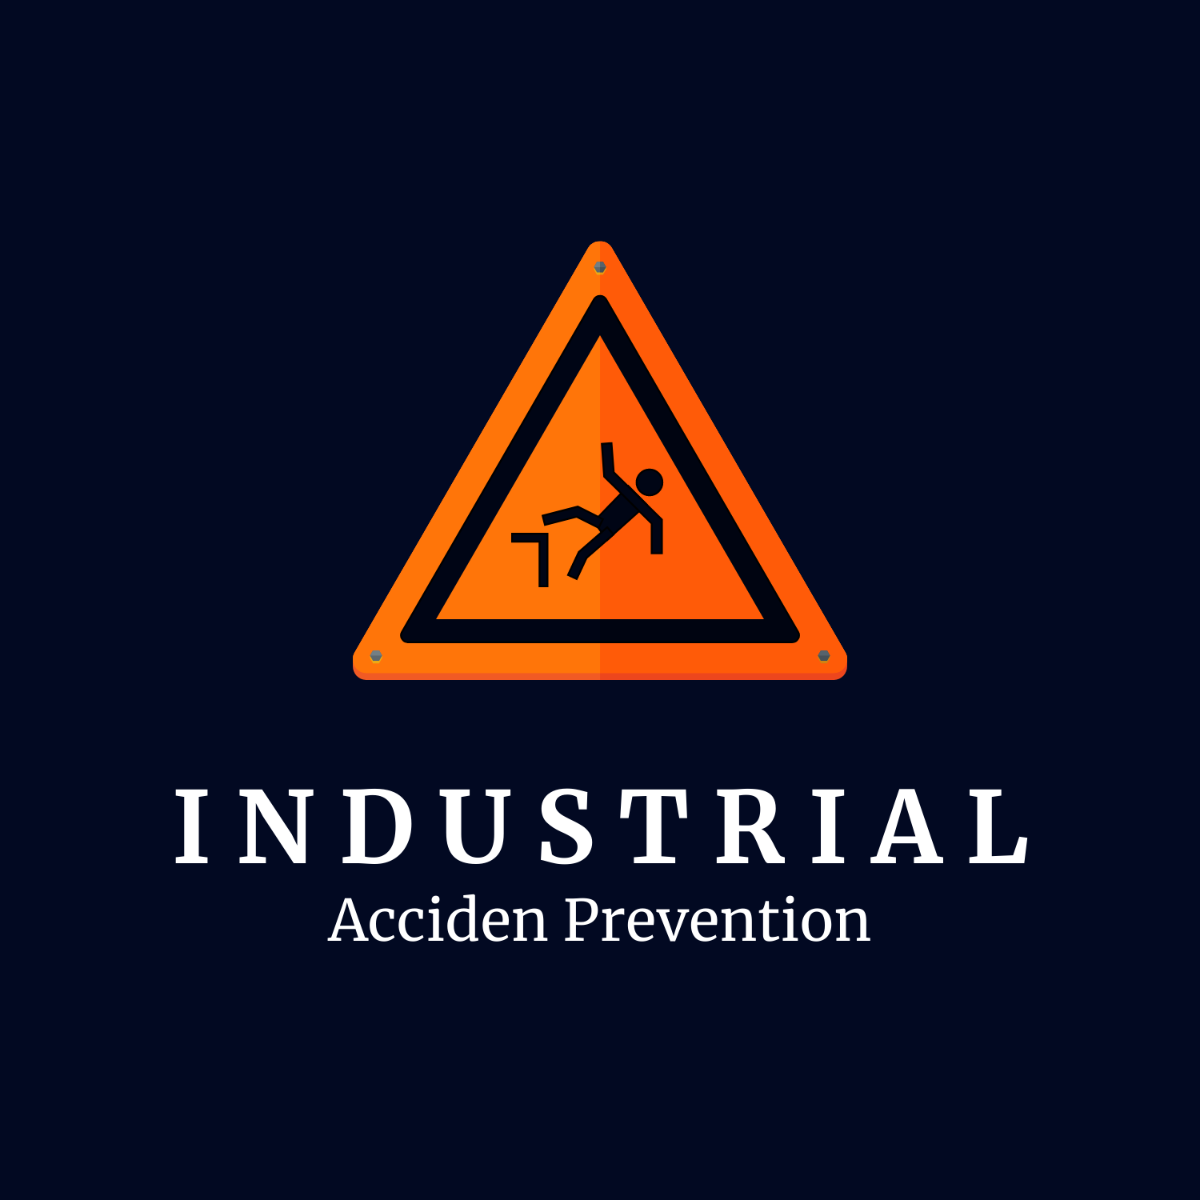 Industrial Accident Prevention Logo Template